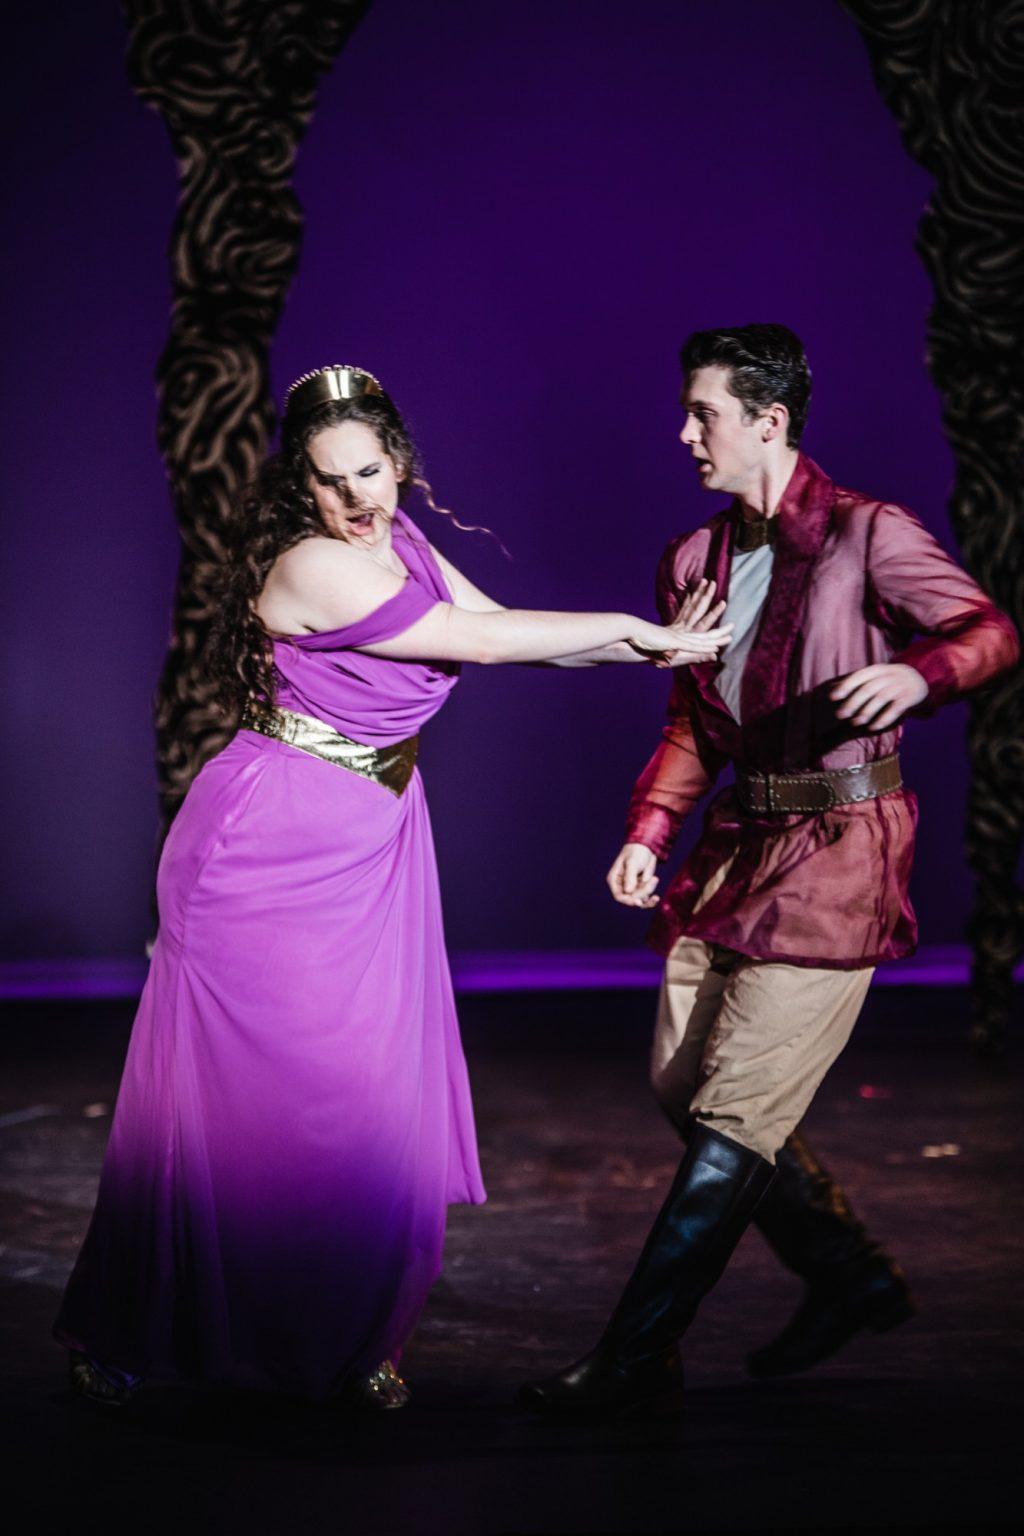 Dido, Queen of Carthage (Withers), pushes away her Greek love Aeneas (Joe Hebel). The opera follows the tragic journey of the couple's struggle between love and prophesy.